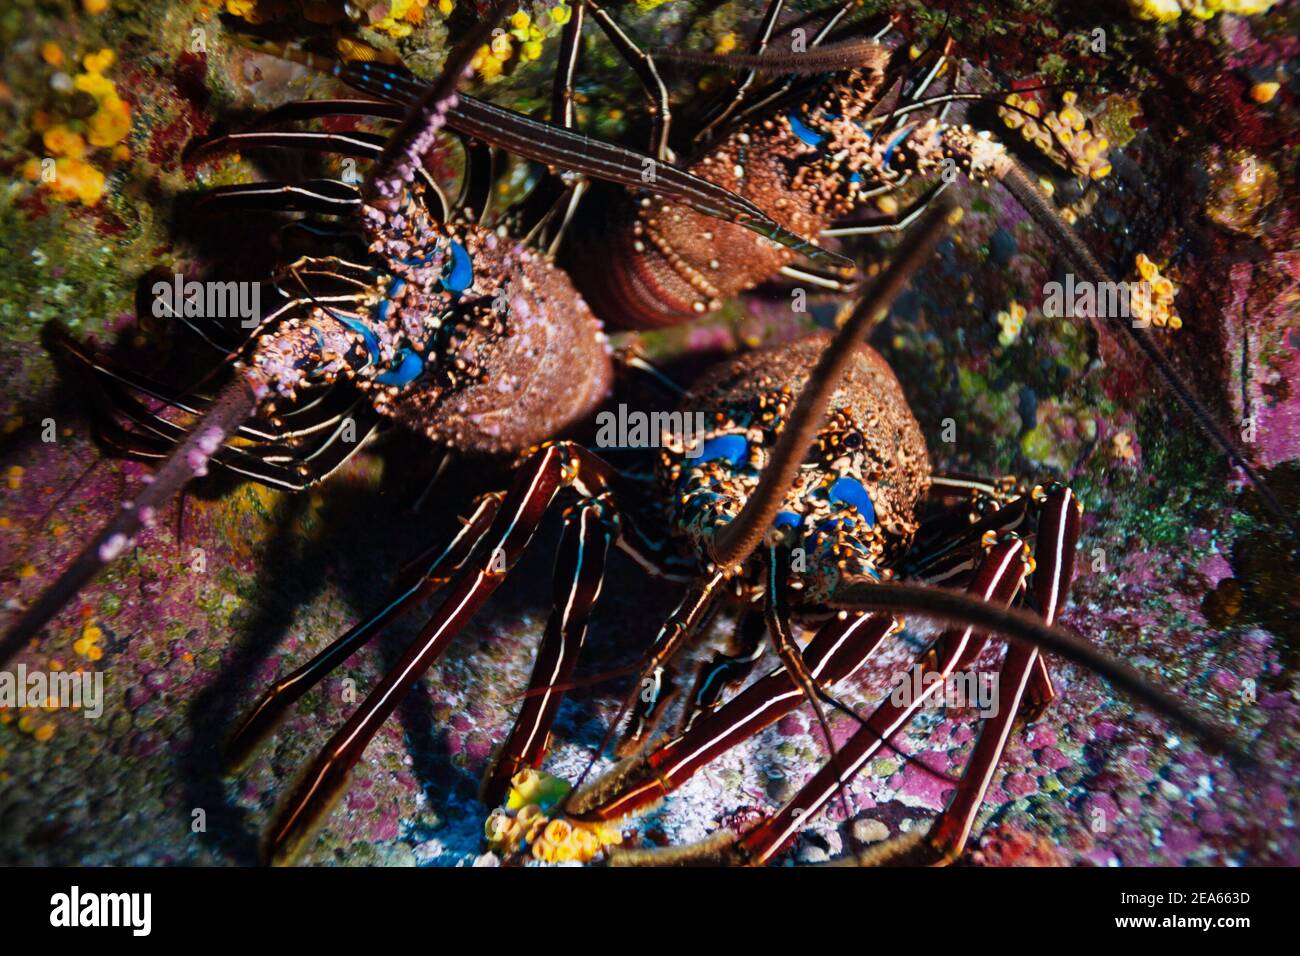 Underwater photo of two lobsters on the Pacific ocean floor Stock Photo